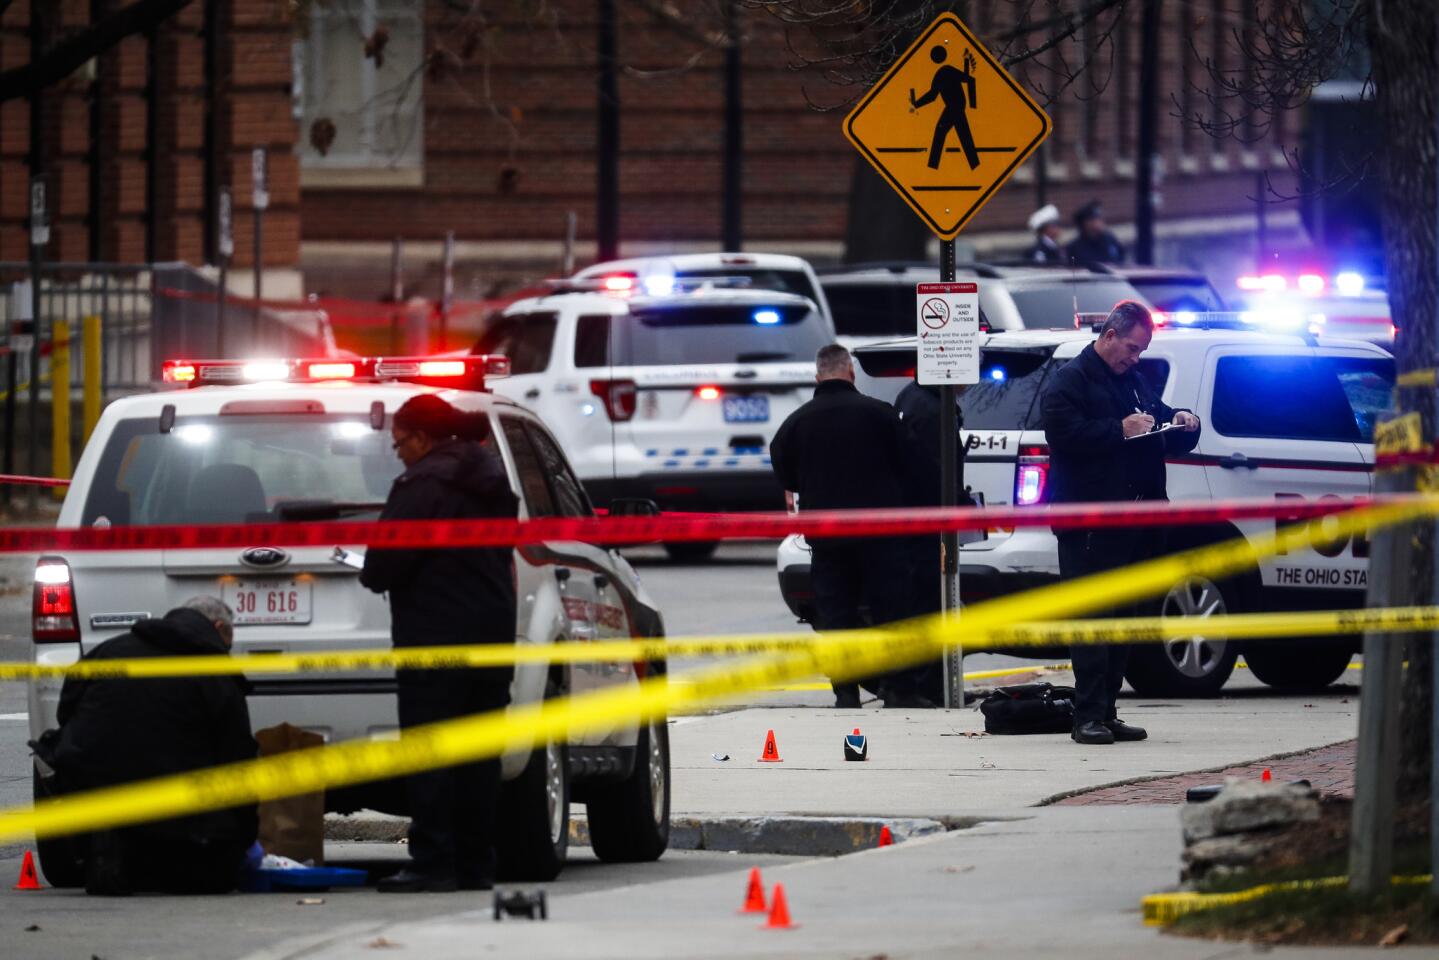 Crime scene investigators collect evidence from the scene of an attack on campus at Ohio State University.